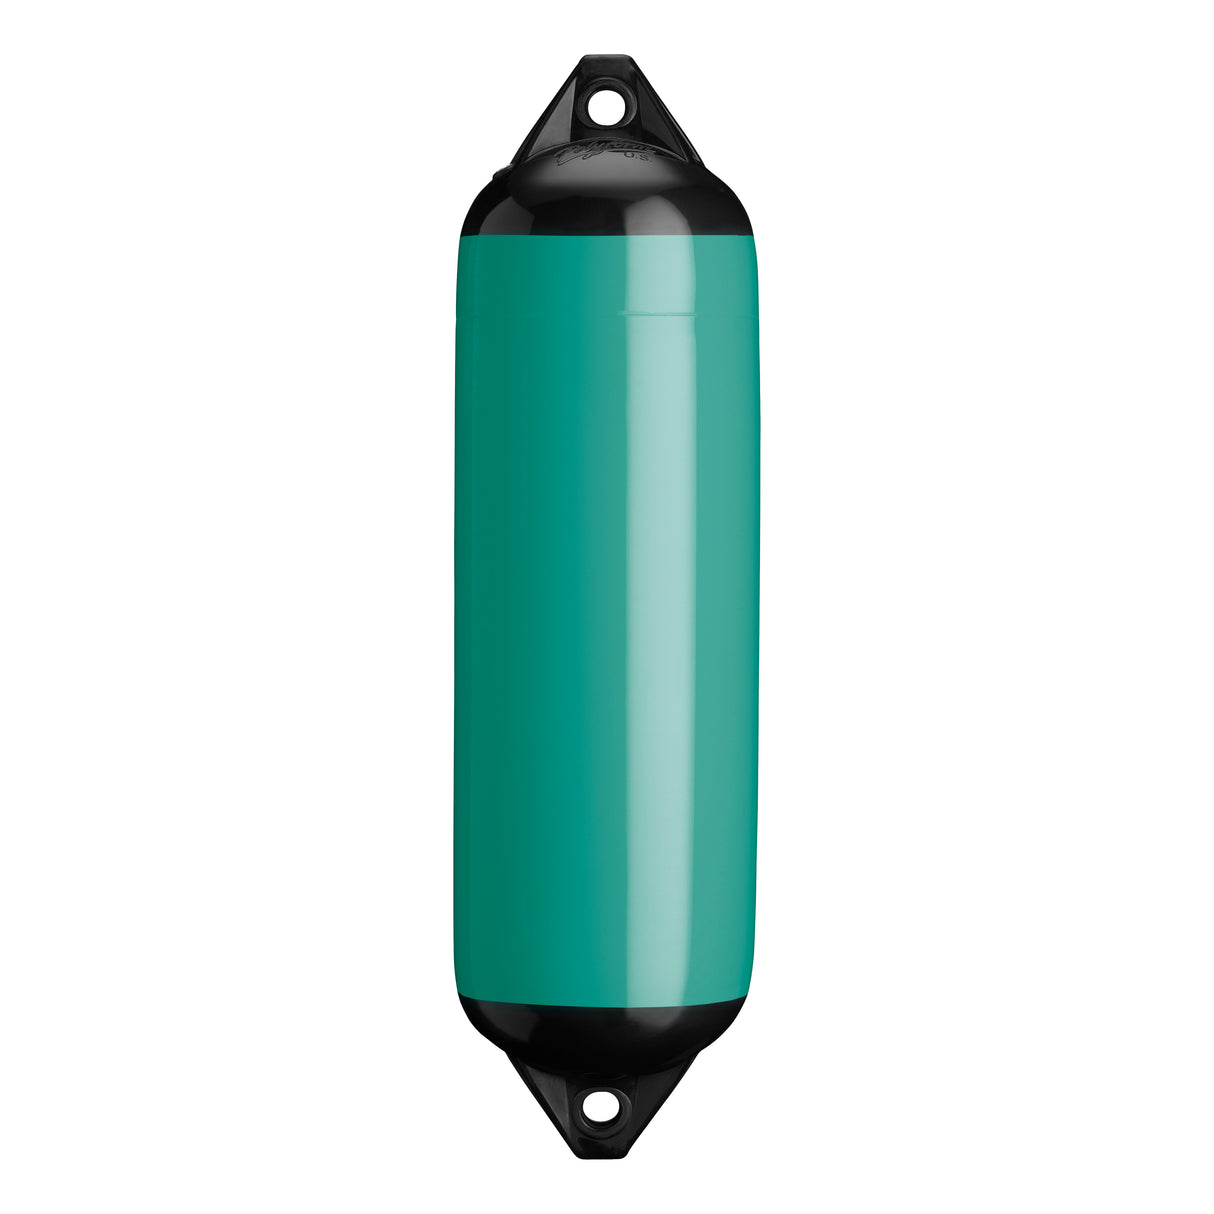 Teal boat fender with Black-Top, Polyform F-3